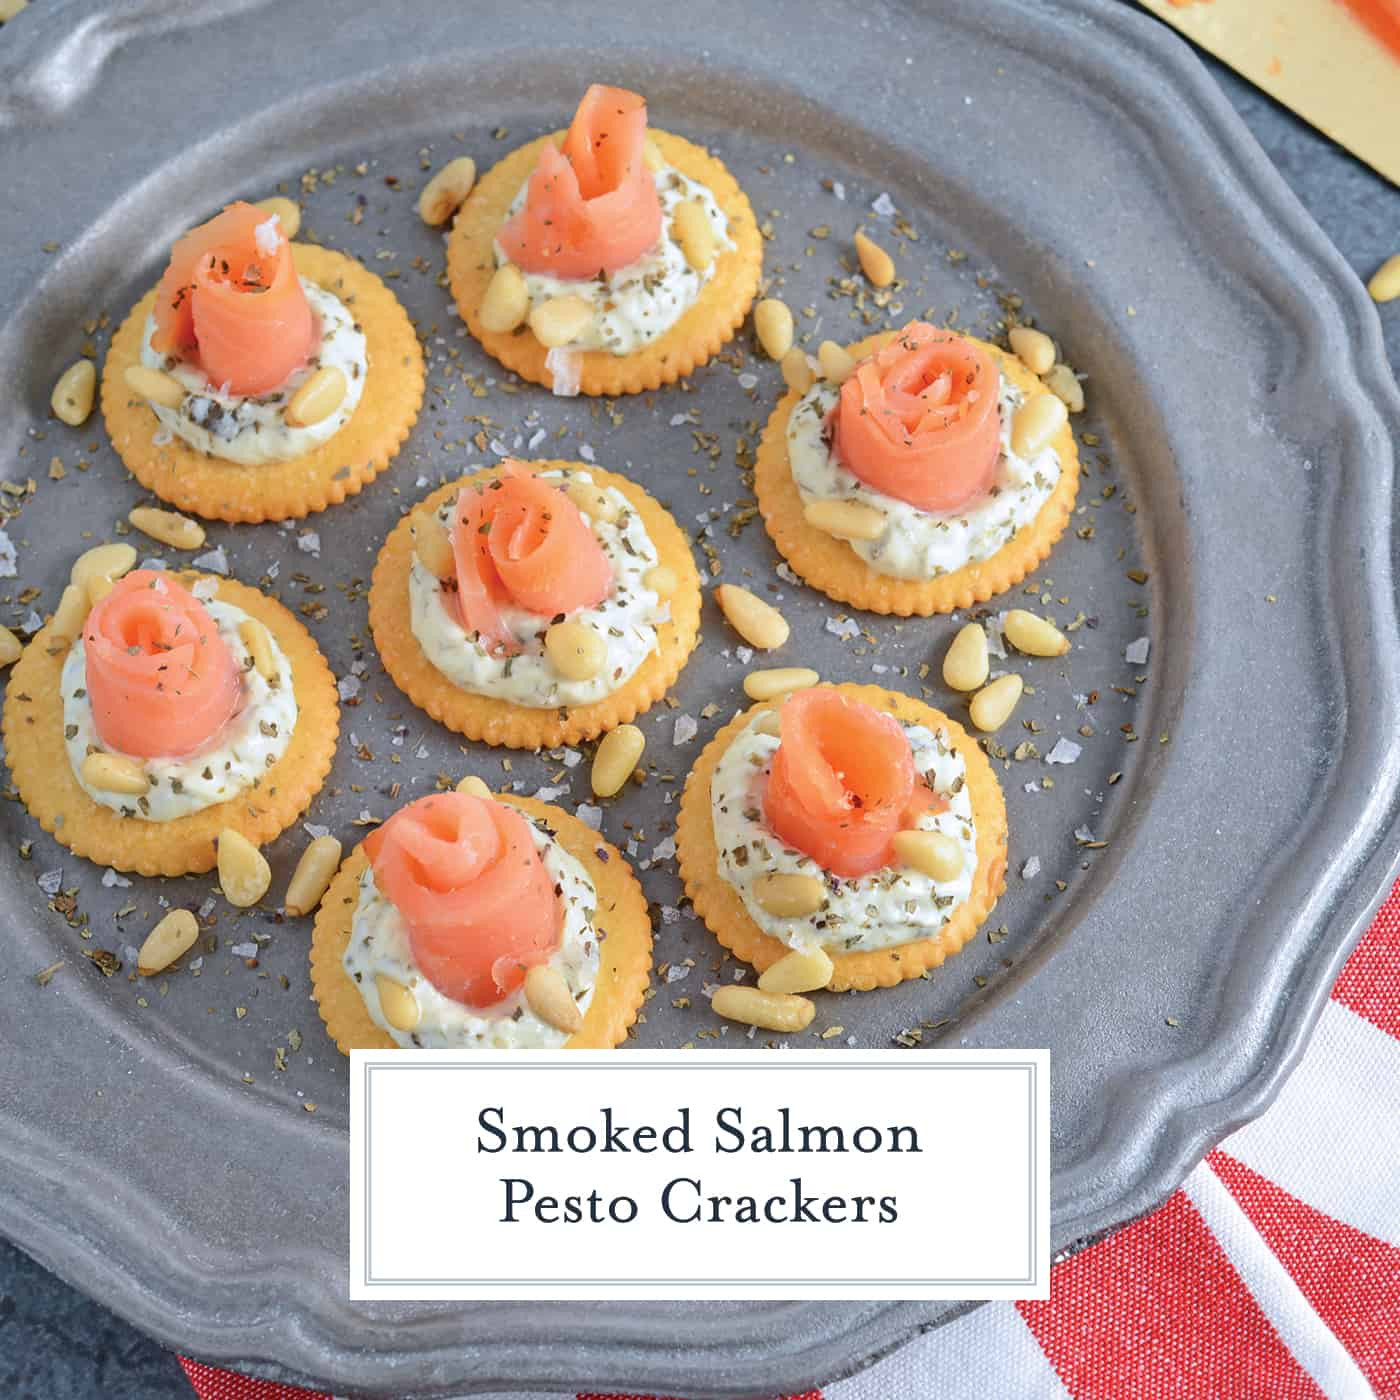 Smoked Salmon And Crackers Appetizer
 Smoked Salmon Pesto Crackers A Delicious smoked salmon